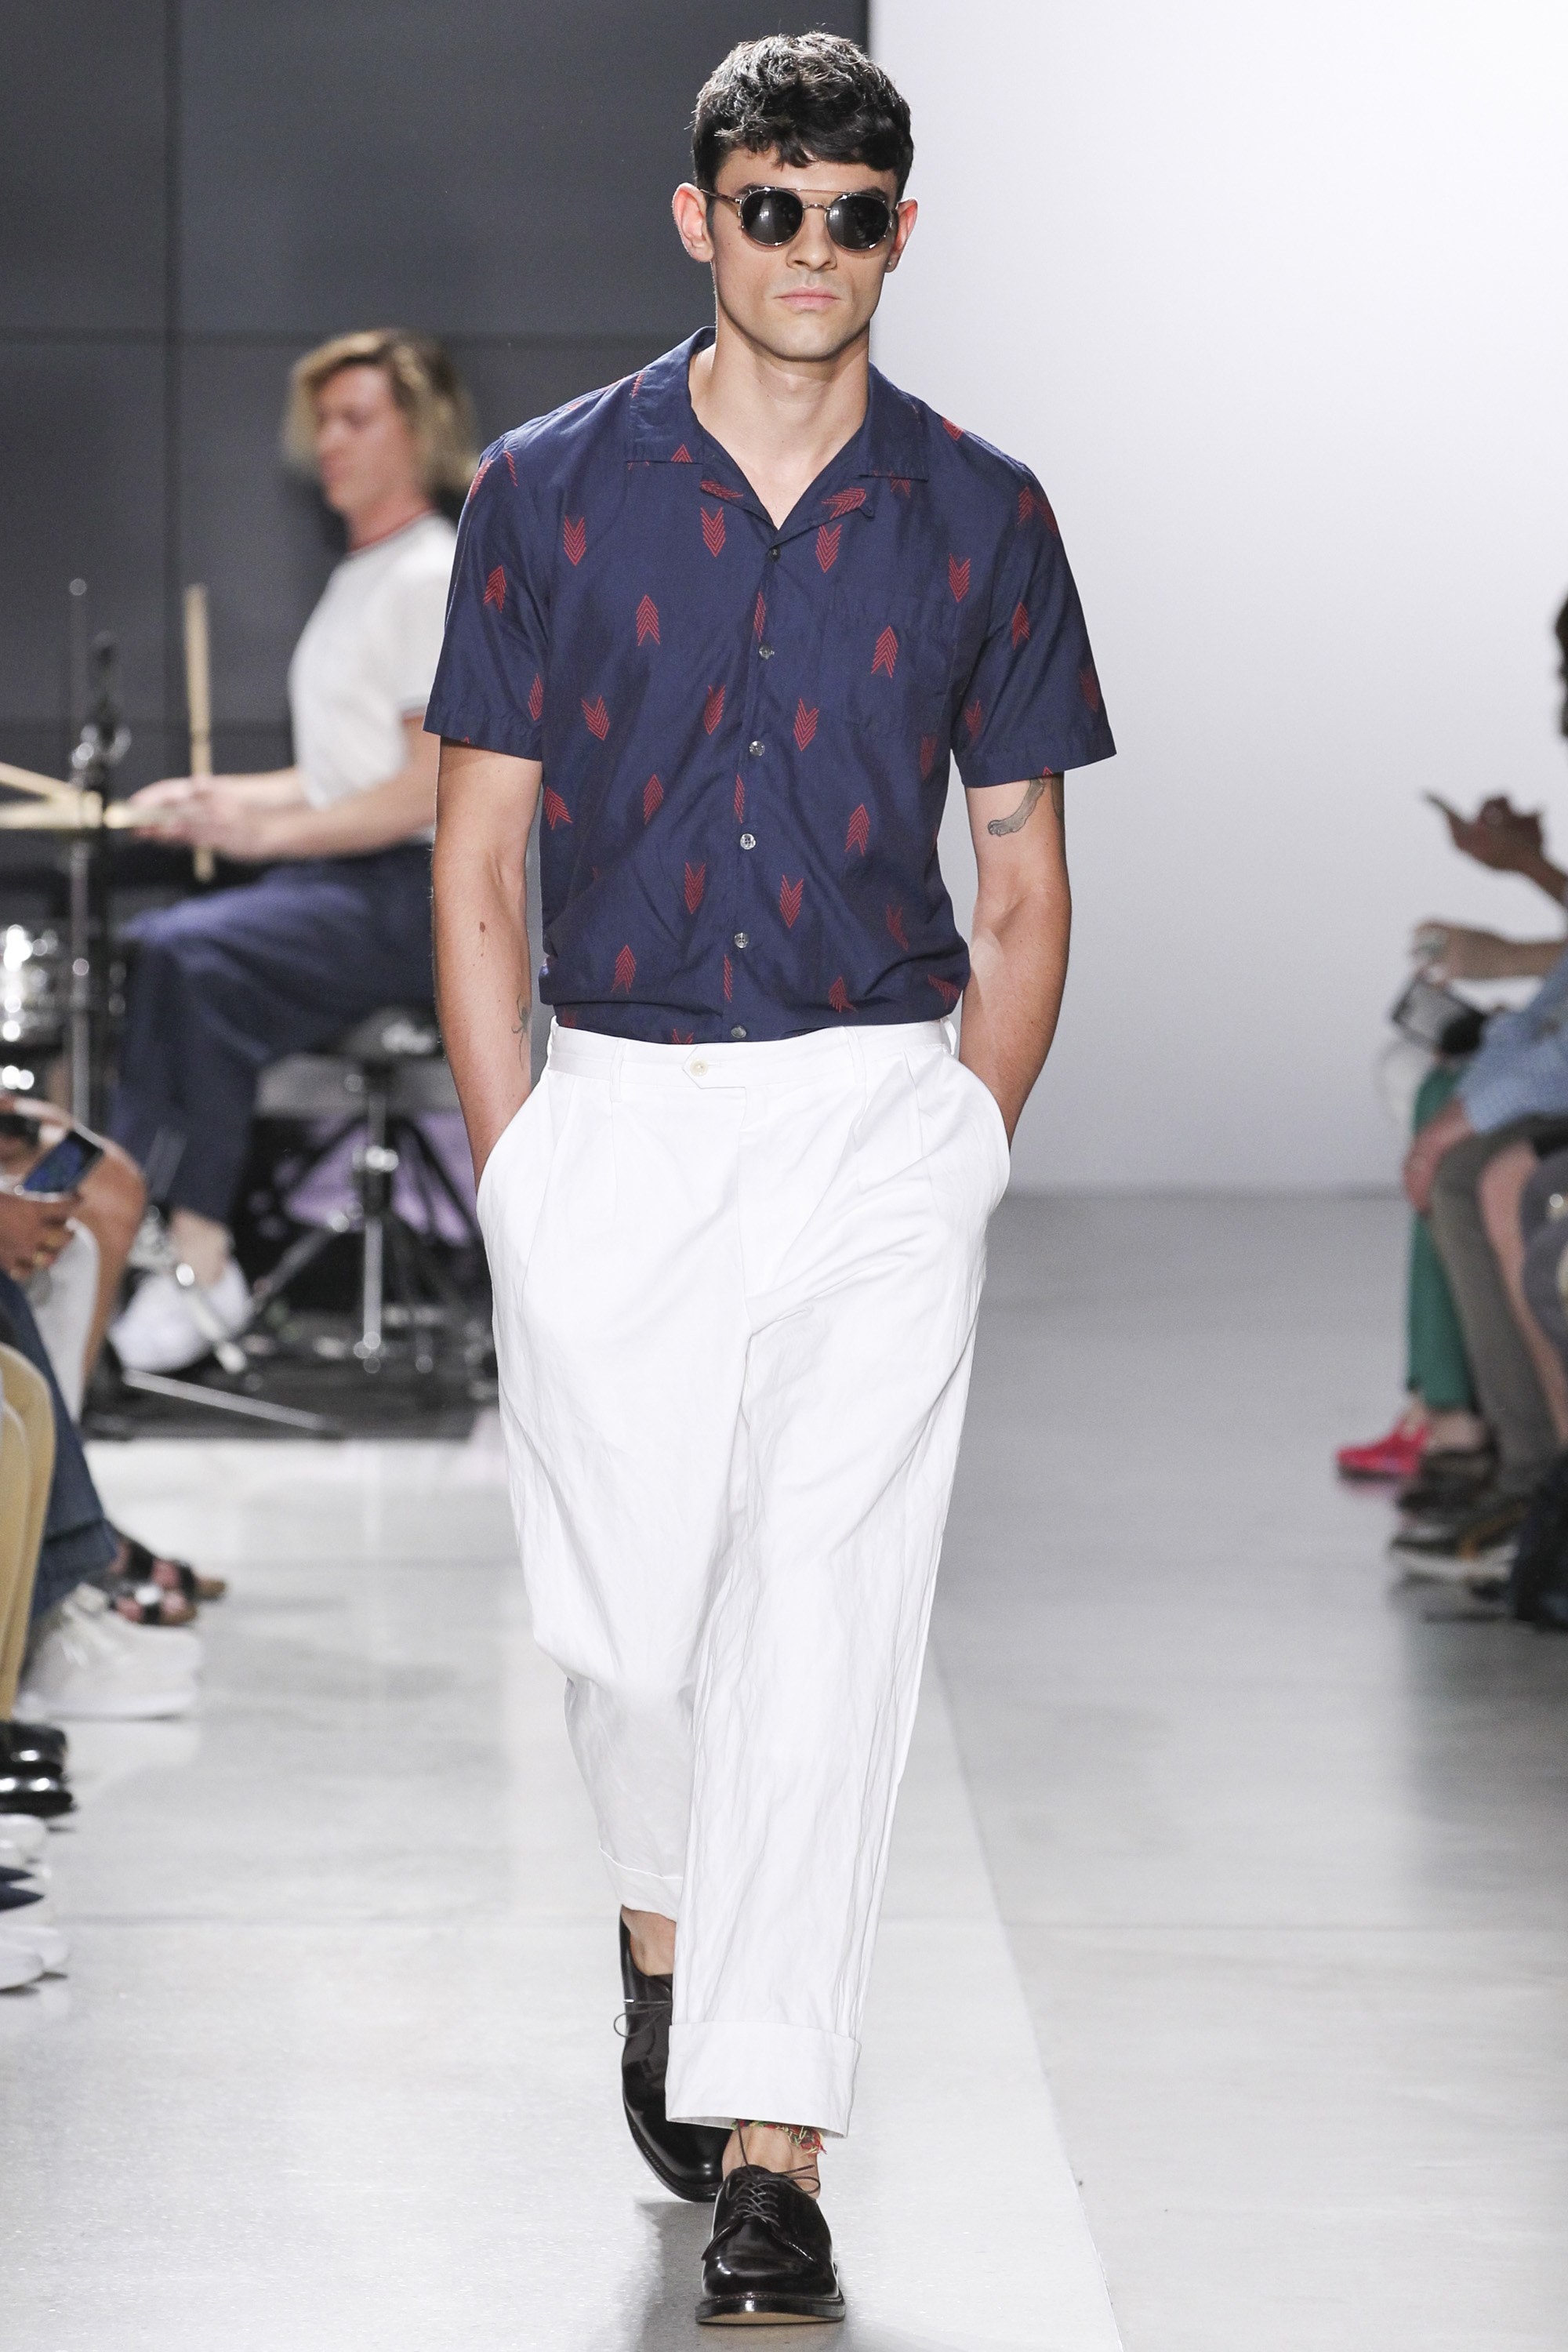 Todd Snyder 2018 Spring Summer Collection Runway Show